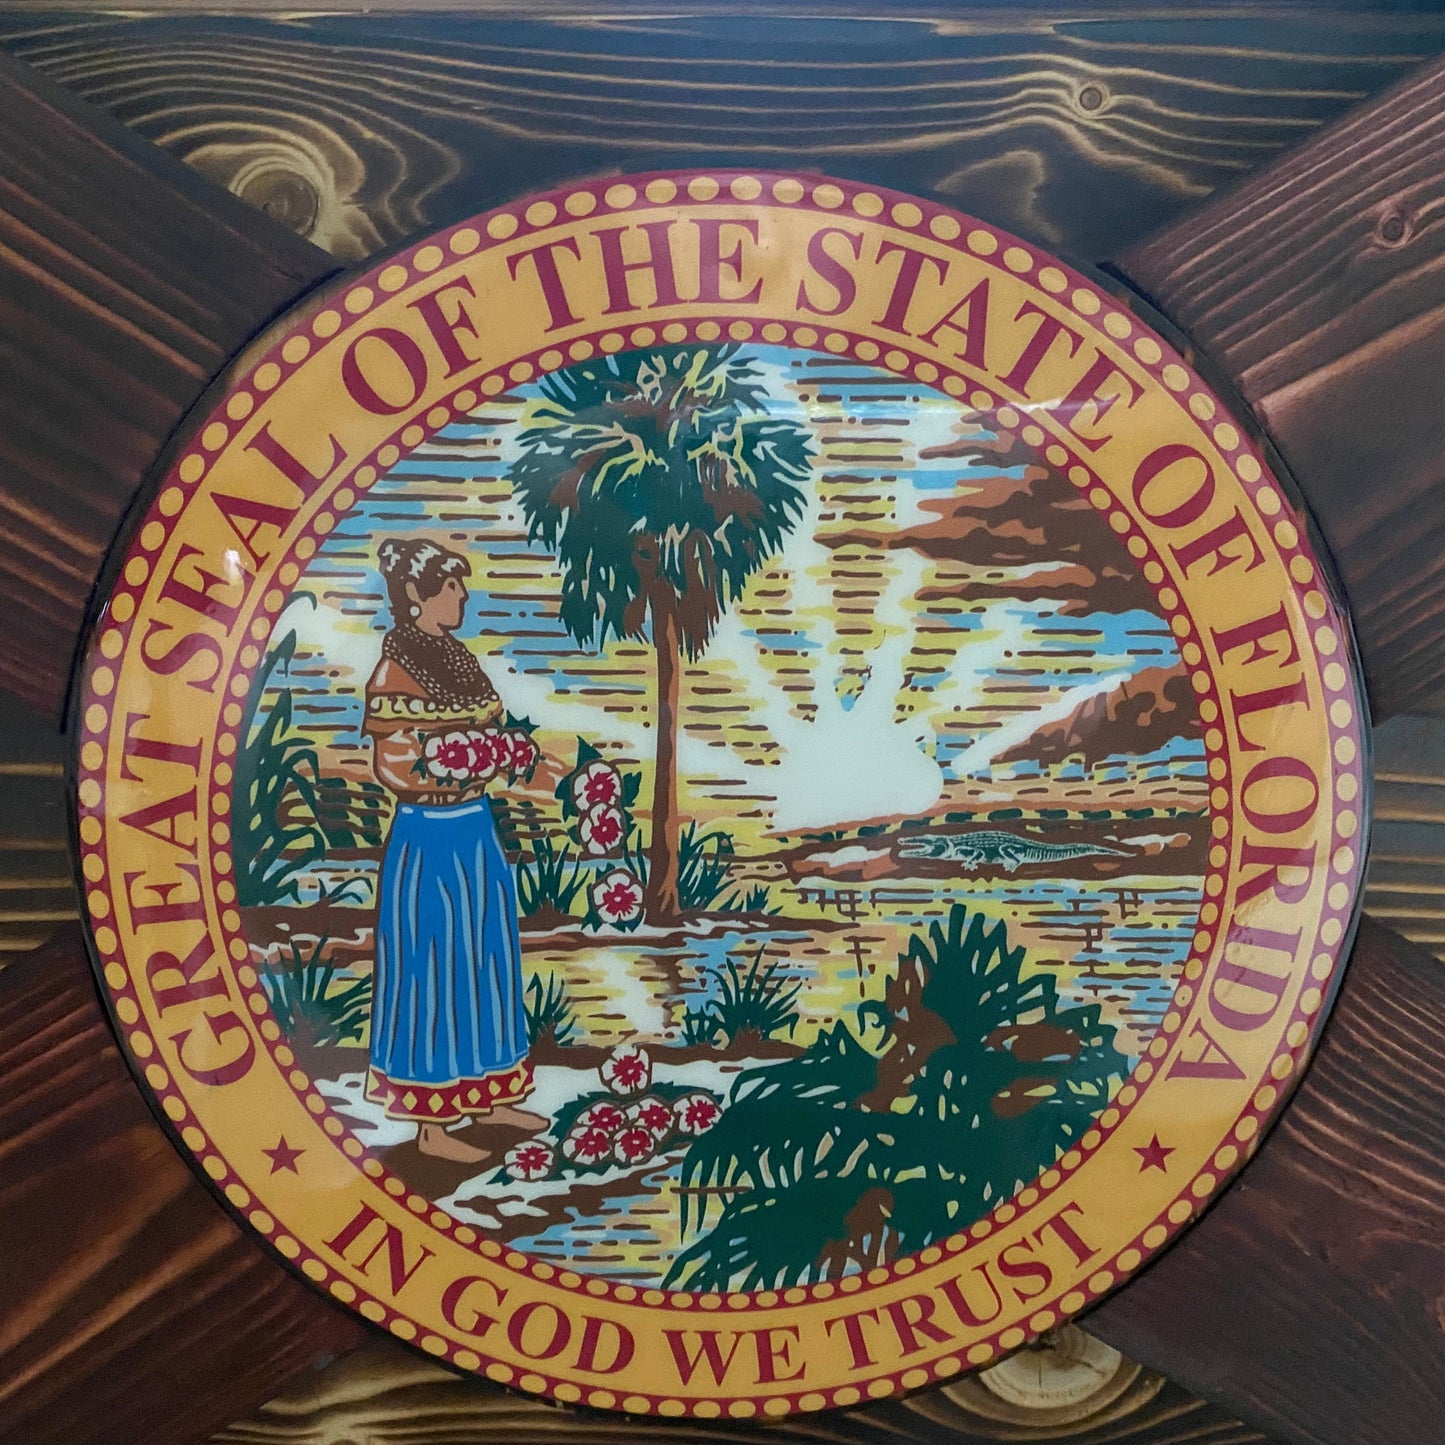 Wildfire Solid Wood Florida Flag